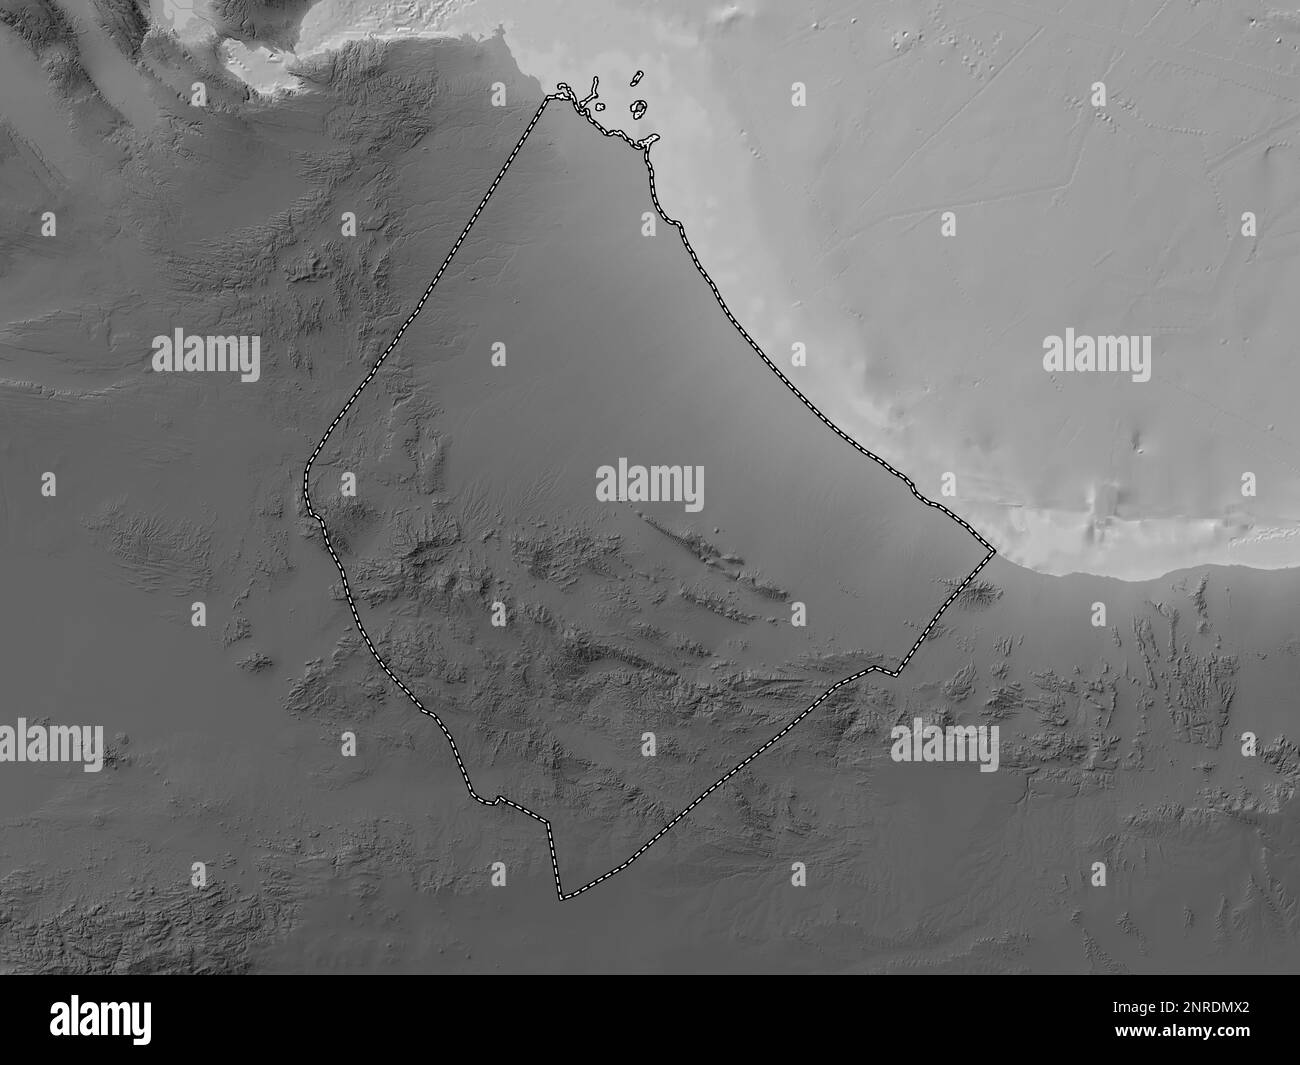 Awdal, region of Somalia. Grayscale elevation map with lakes and rivers Stock Photo